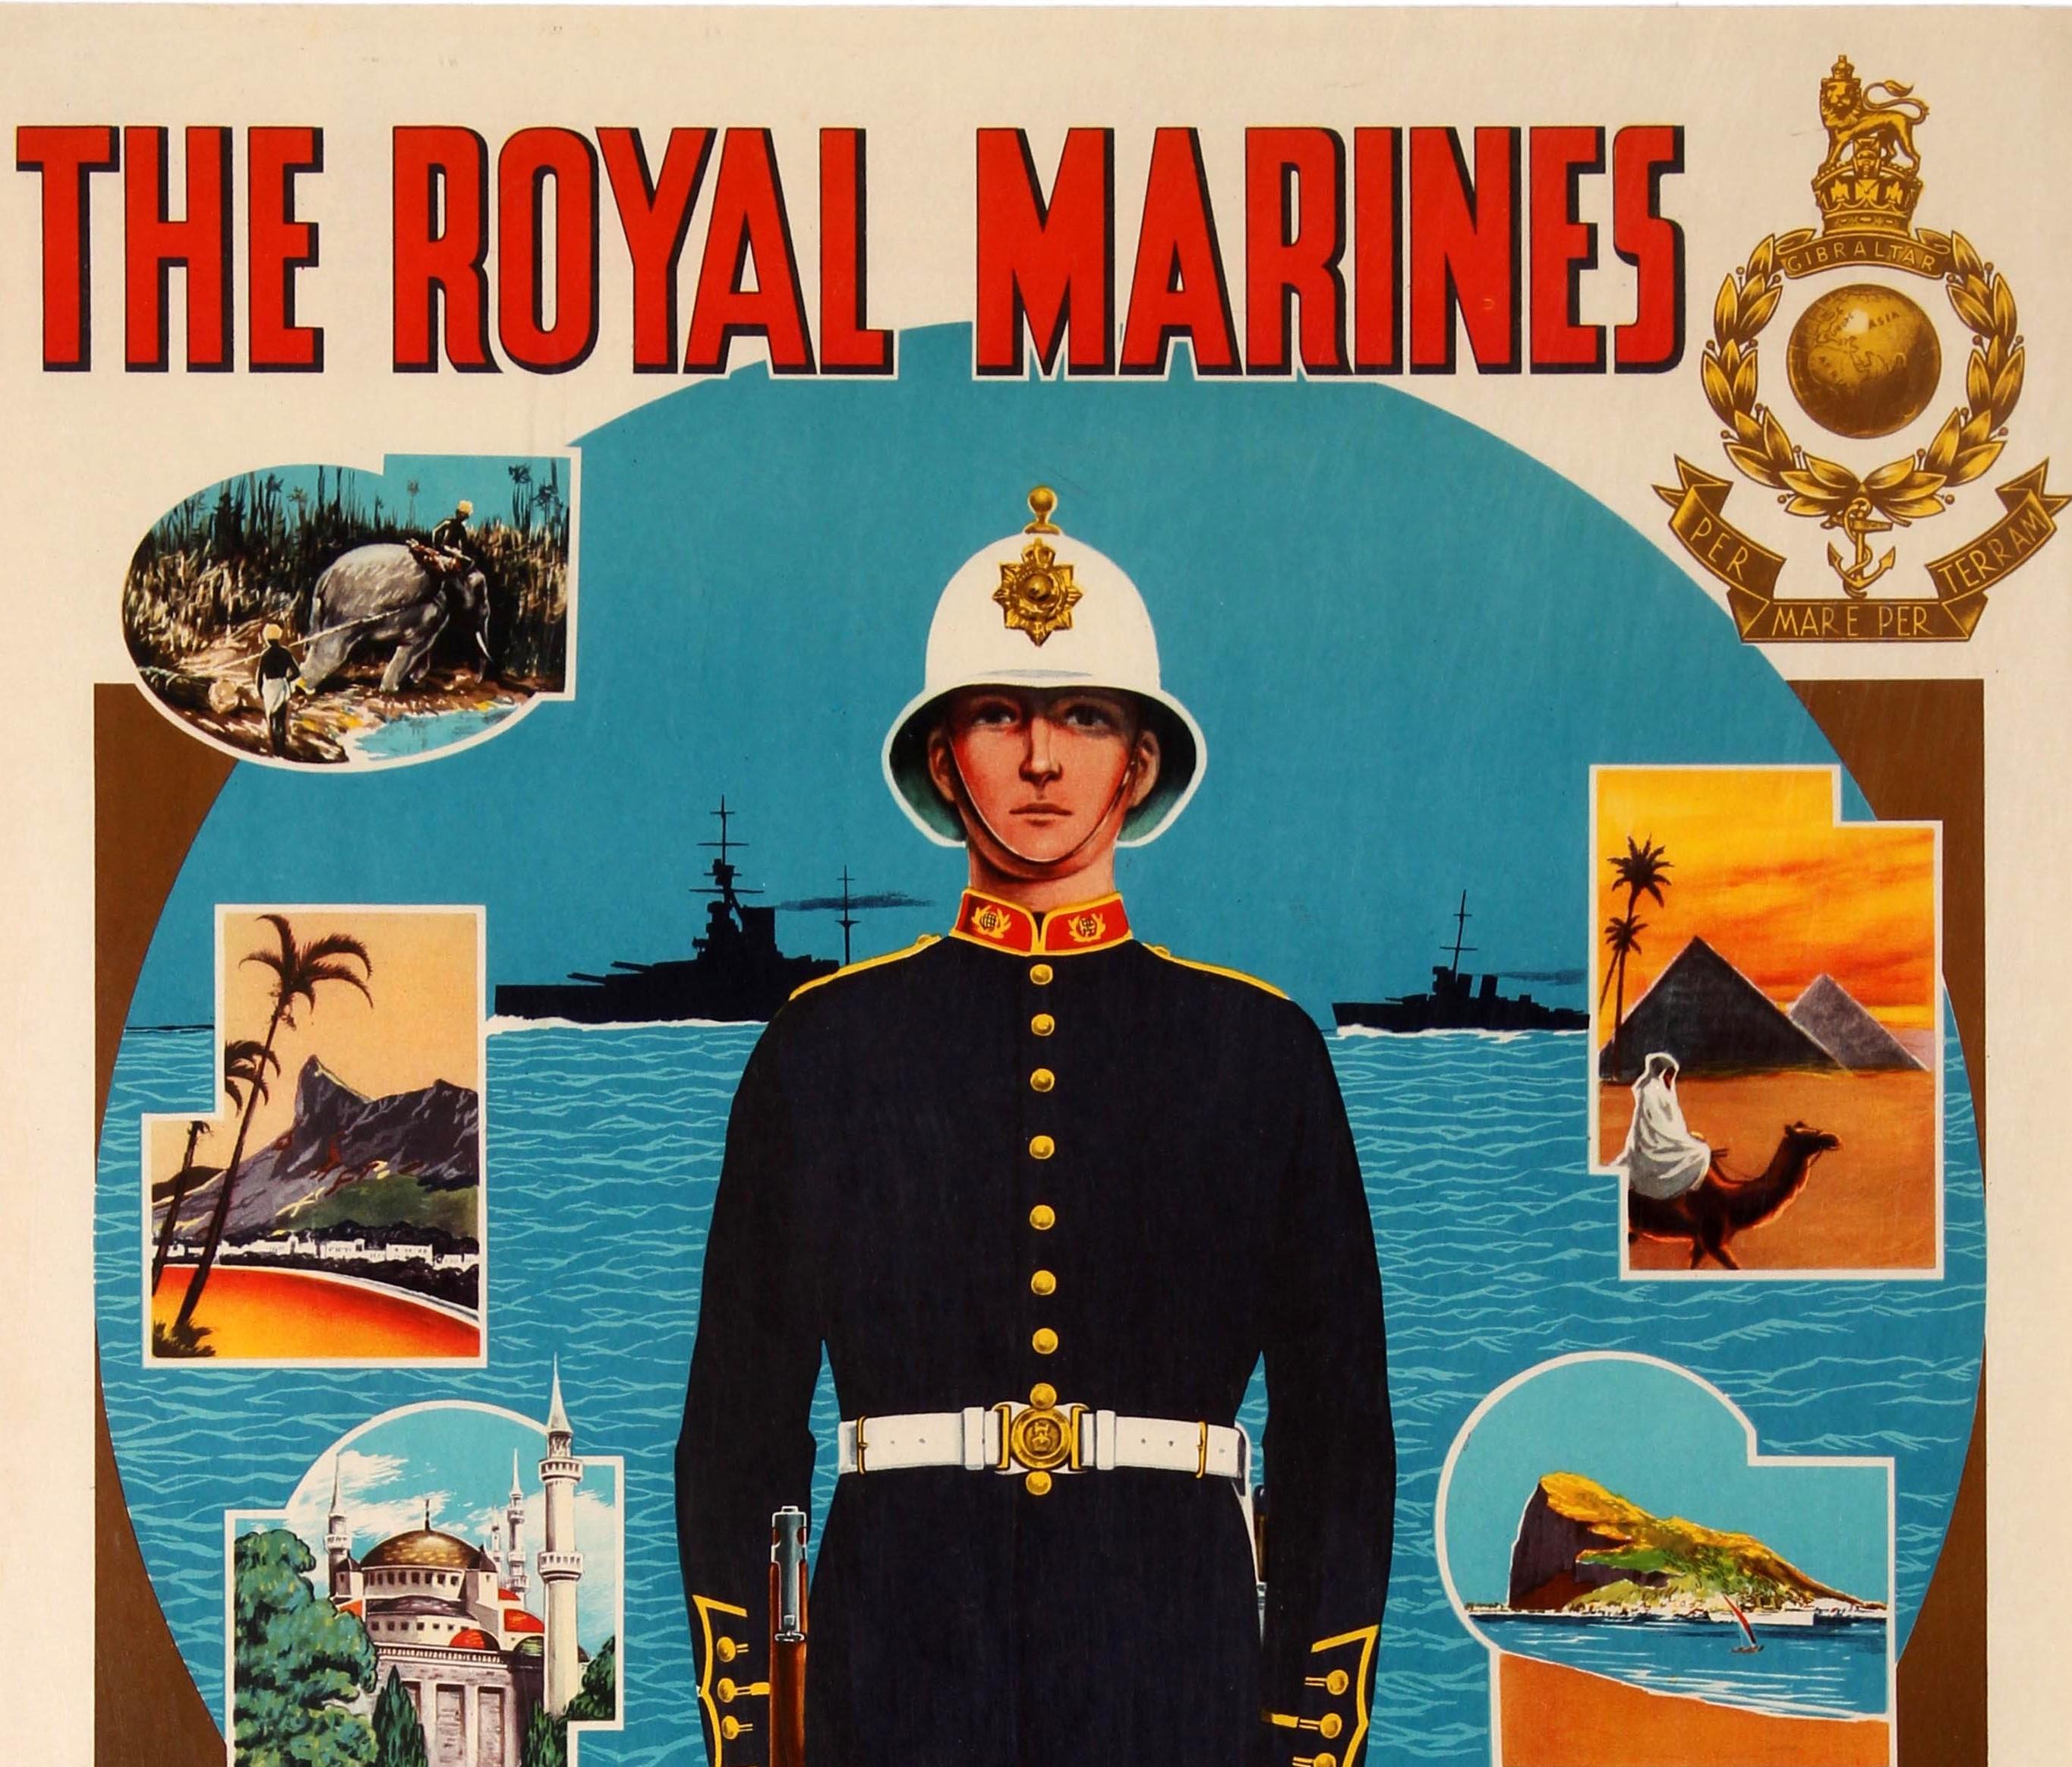 Original vintage military recruitment poster - The Royal Marines Long Service Good Pay Pension Age limits for enlistment 17-23 years Apply to Recruiting Staff Officer Royal Navy & Royal Marines - featuring a colourful illustration showing a soldier